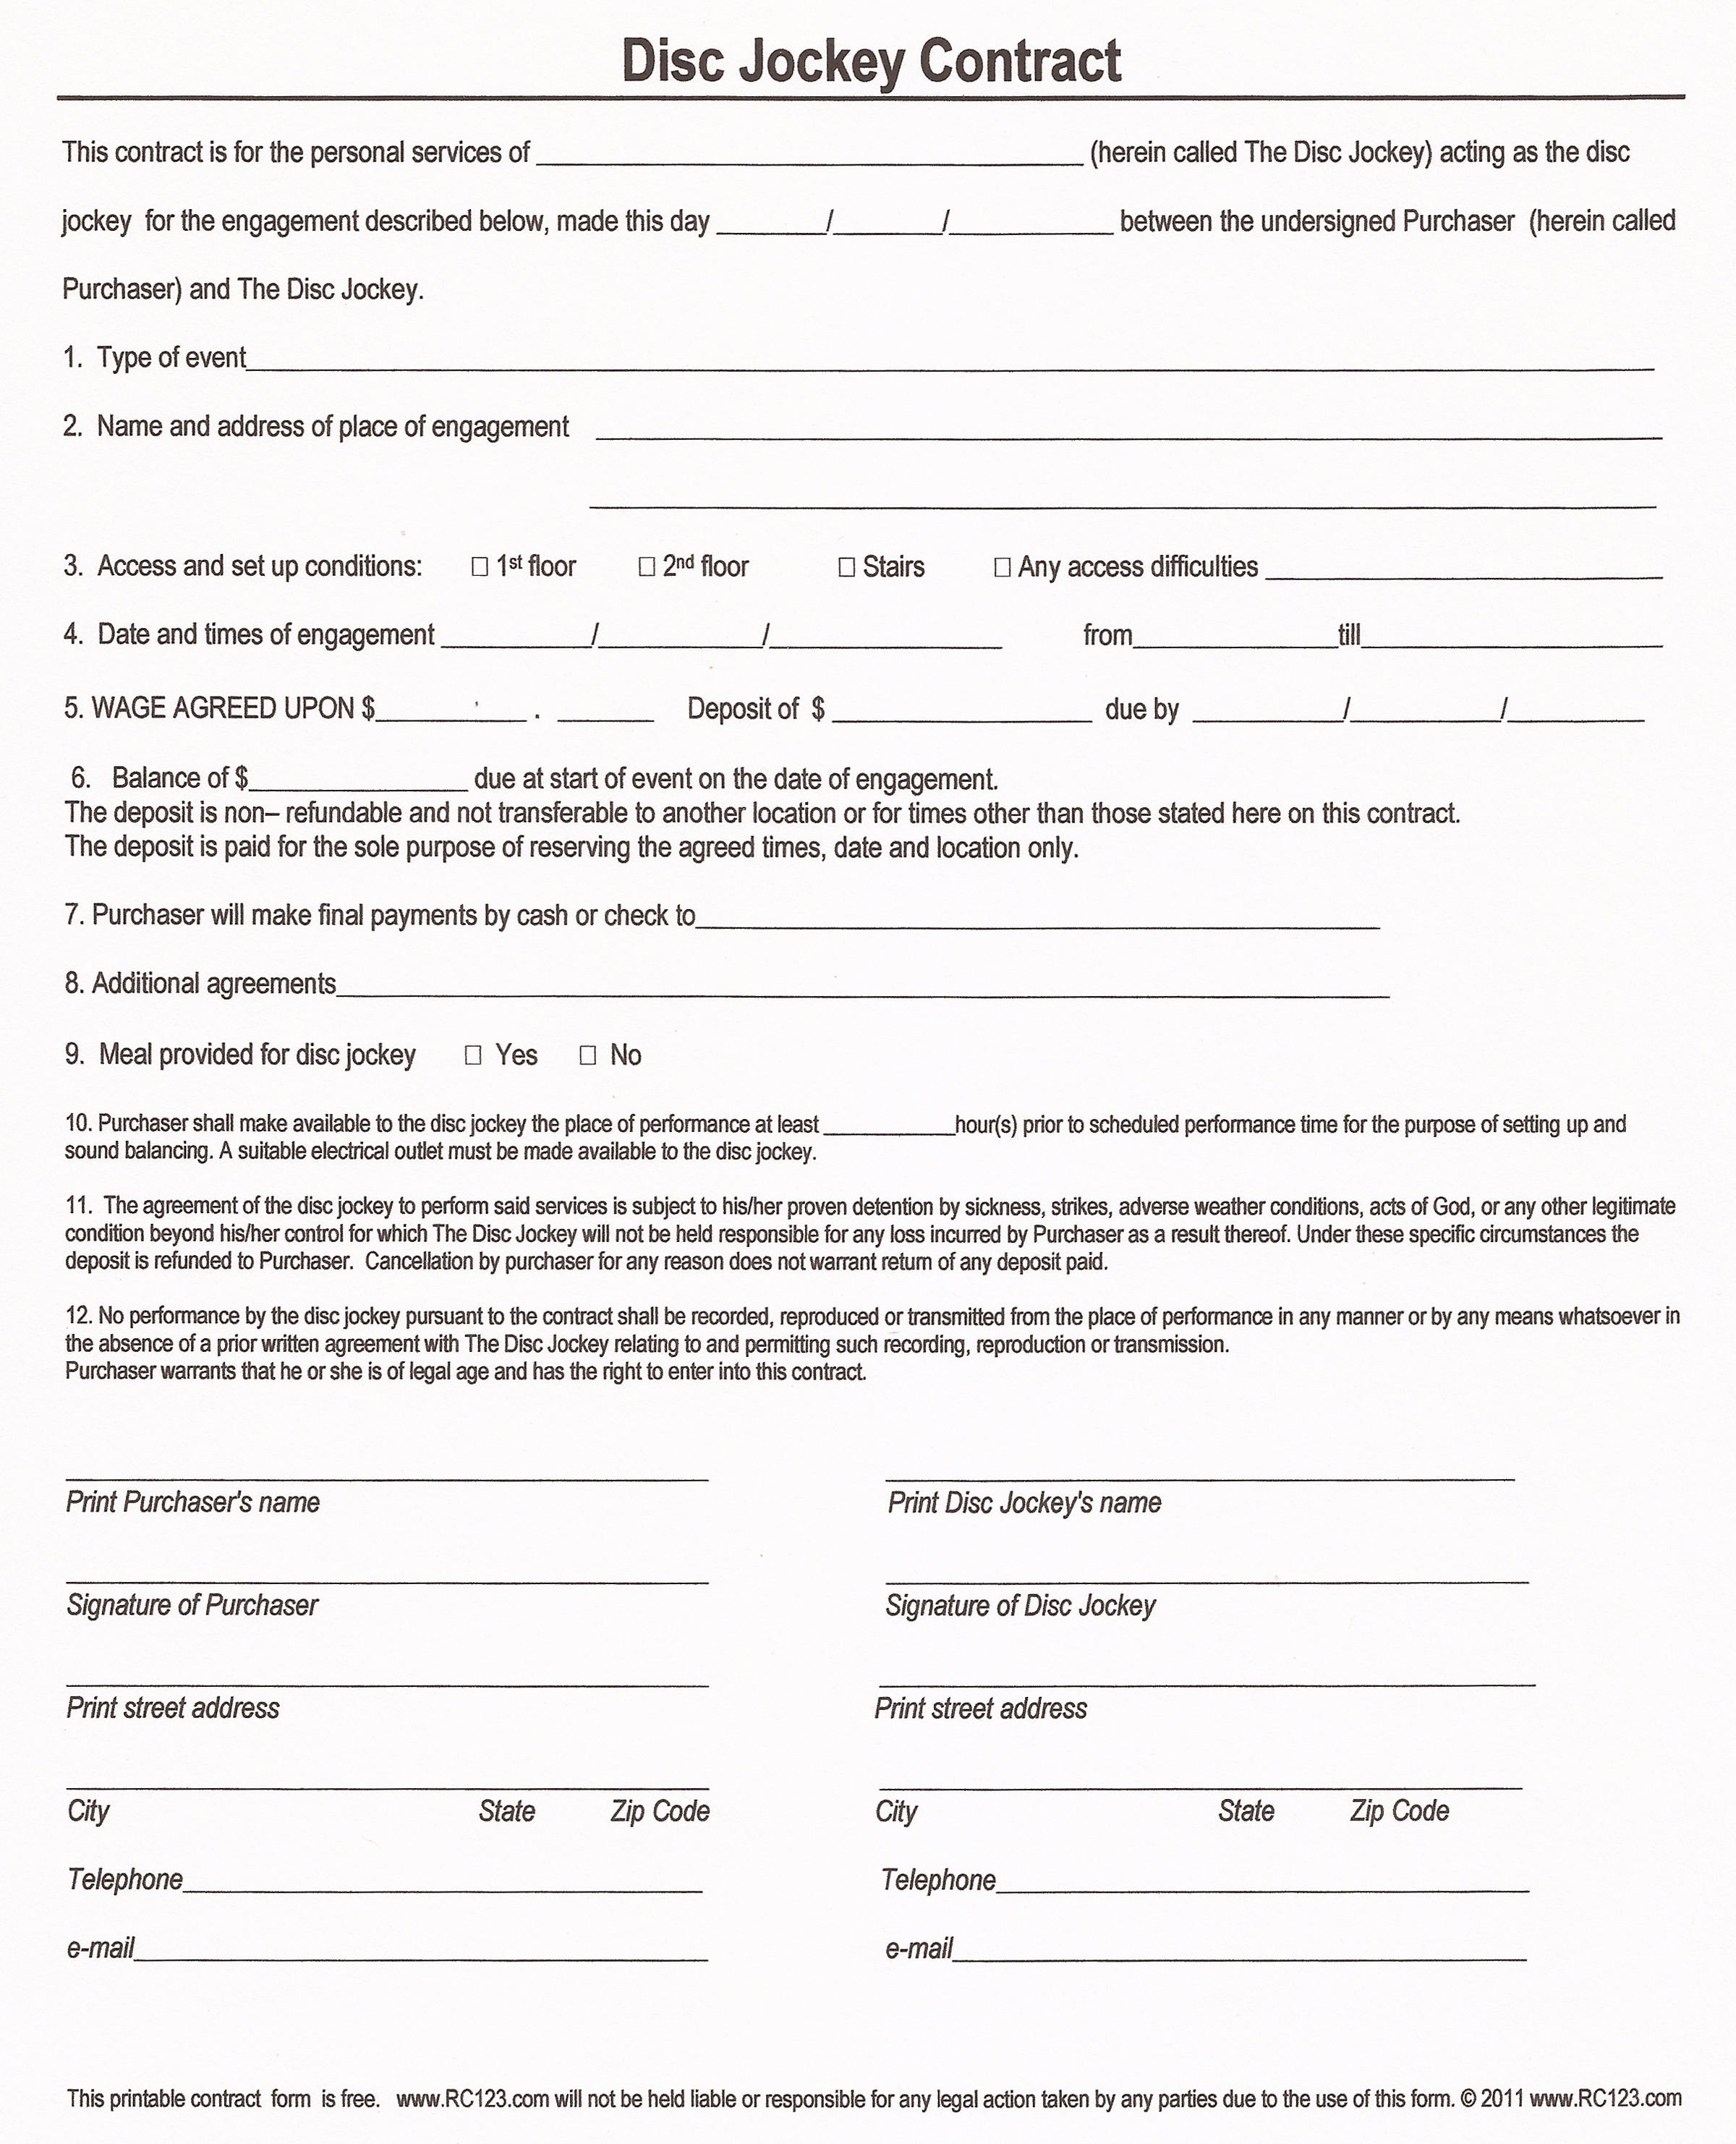 Free And Printable Disc Jockey Contract Form - Rc123 - Free Printable Contracts